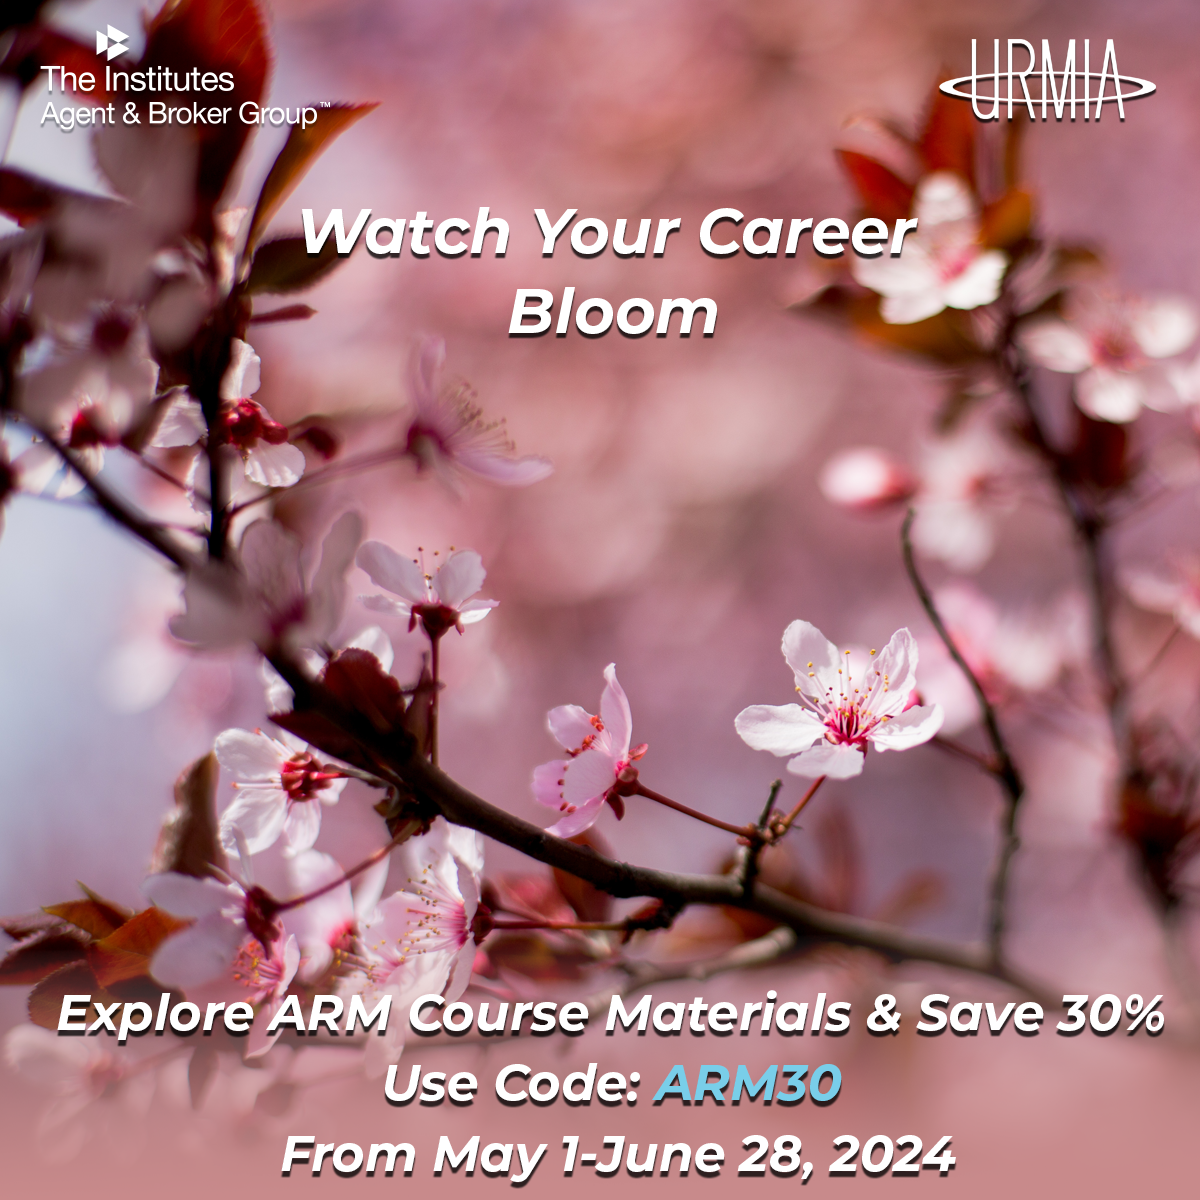 A close-up of cherry blossom branches with the words: Watch your Career Bloom overlaid on top of them